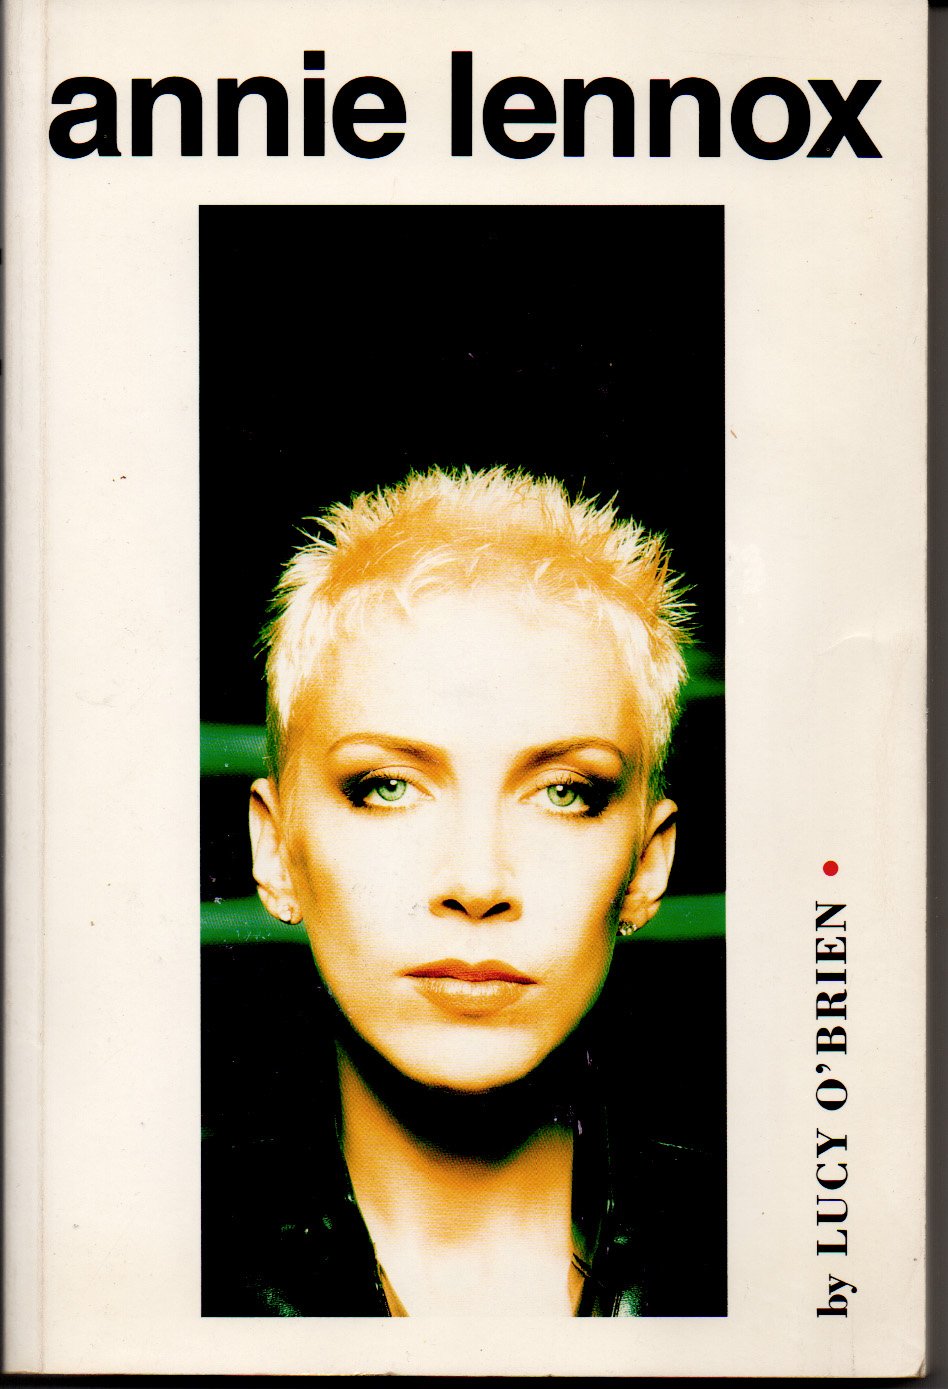 Annie Lennox by Lucy O'Brien: stock image of front cover.